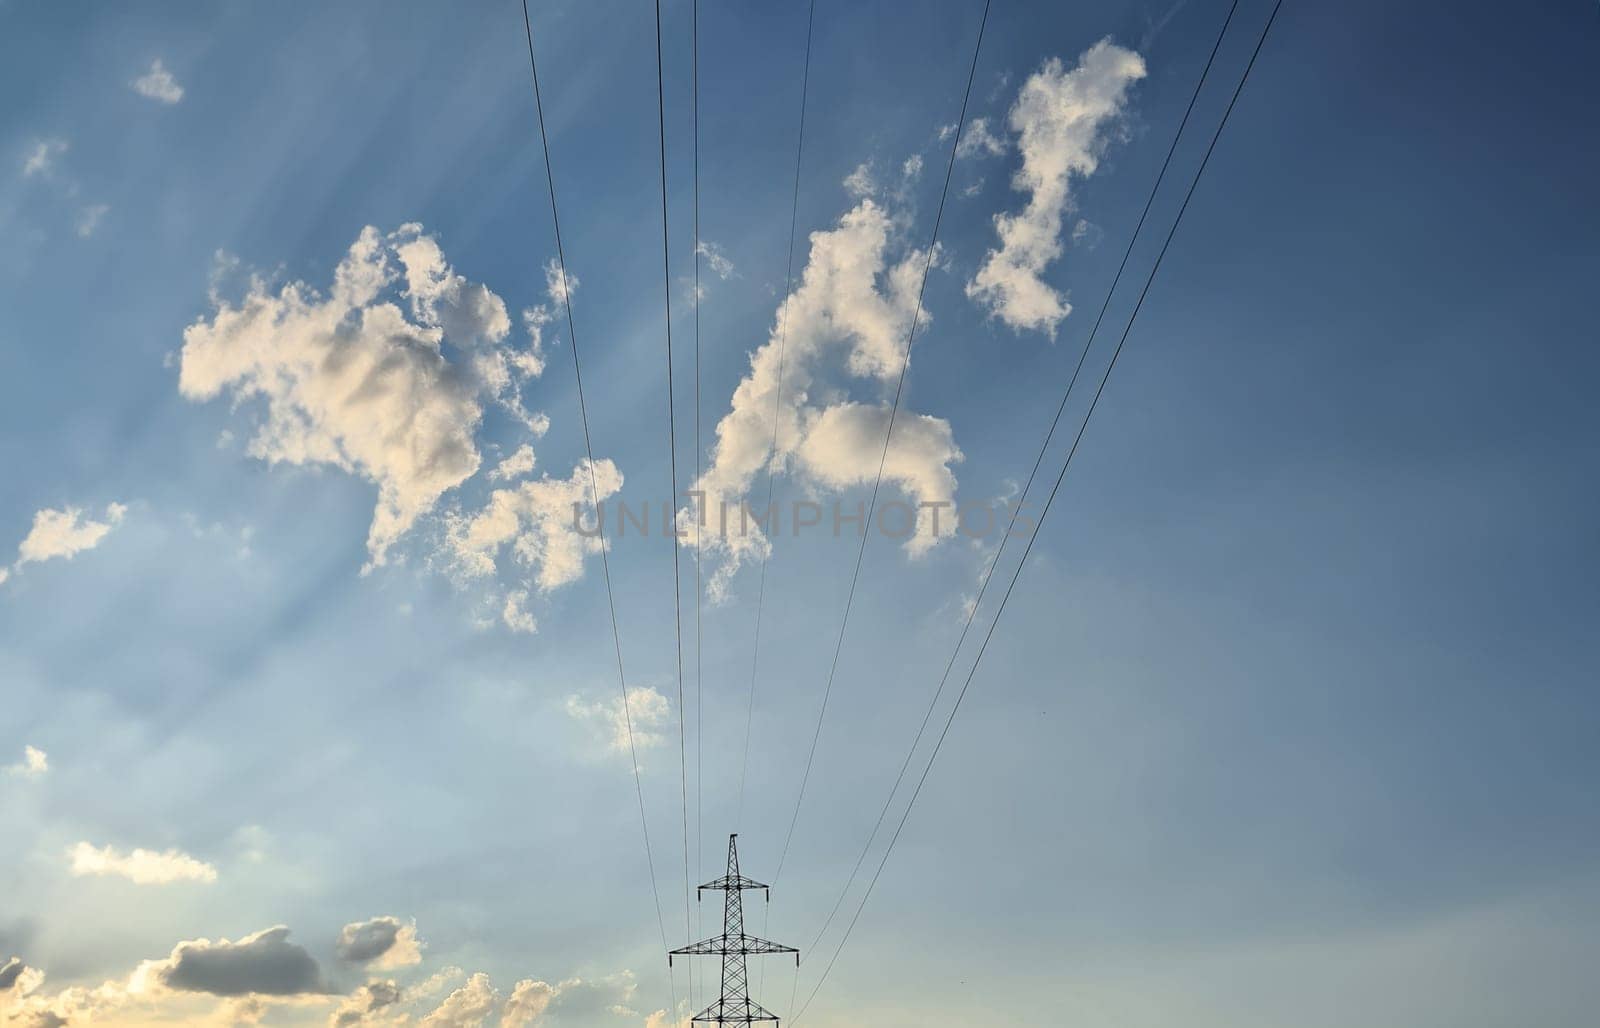 Electric wires from power lines on background of blue sky with clouds. Power supply concept